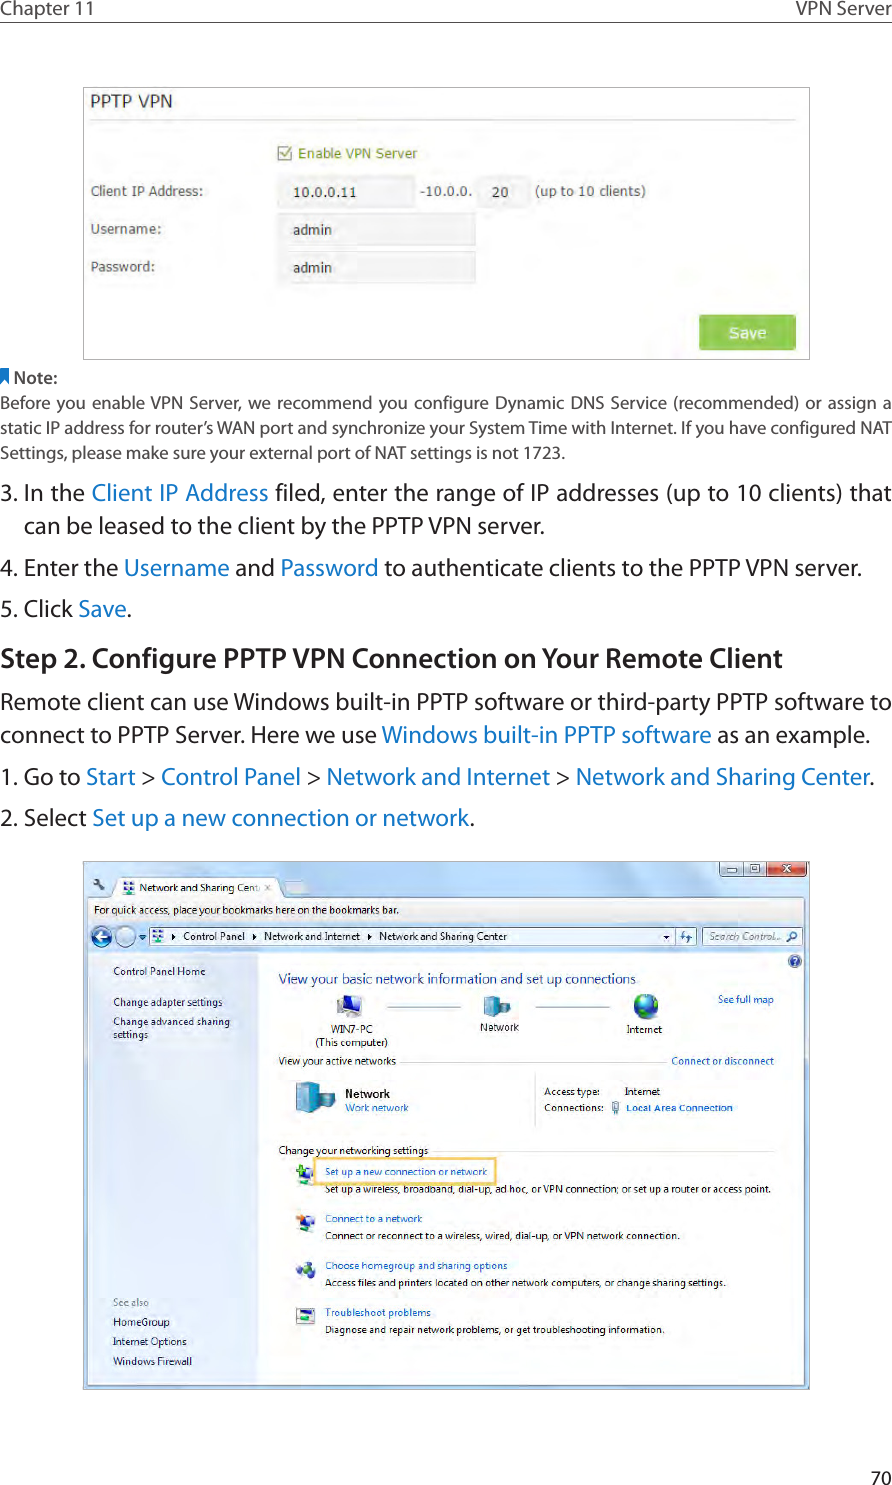 70Chapter 11 VPN ServerNote:Before you enable VPN Server, we recommend you configure Dynamic DNS Service (recommended) or assign a static IP address for router’s WAN port and synchronize your System Time with Internet. If you have configured NAT Settings, please make sure your external port of NAT settings is not 1723.3. In the Client IP Address filed, enter the range of IP addresses (up to 10 clients) that can be leased to the client by the PPTP VPN server.4. Enter the Username and Password to authenticate clients to the PPTP VPN server.5. Click Save.Step 2. Configure PPTP VPN Connection on Your Remote ClientRemote client can use Windows built-in PPTP software or third-party PPTP software to connect to PPTP Server. Here we use Windows built-in PPTP software as an example.1. Go to Start &gt; Control Panel &gt; Network and Internet &gt; Network and Sharing Center.2. Select Set up a new connection or network.